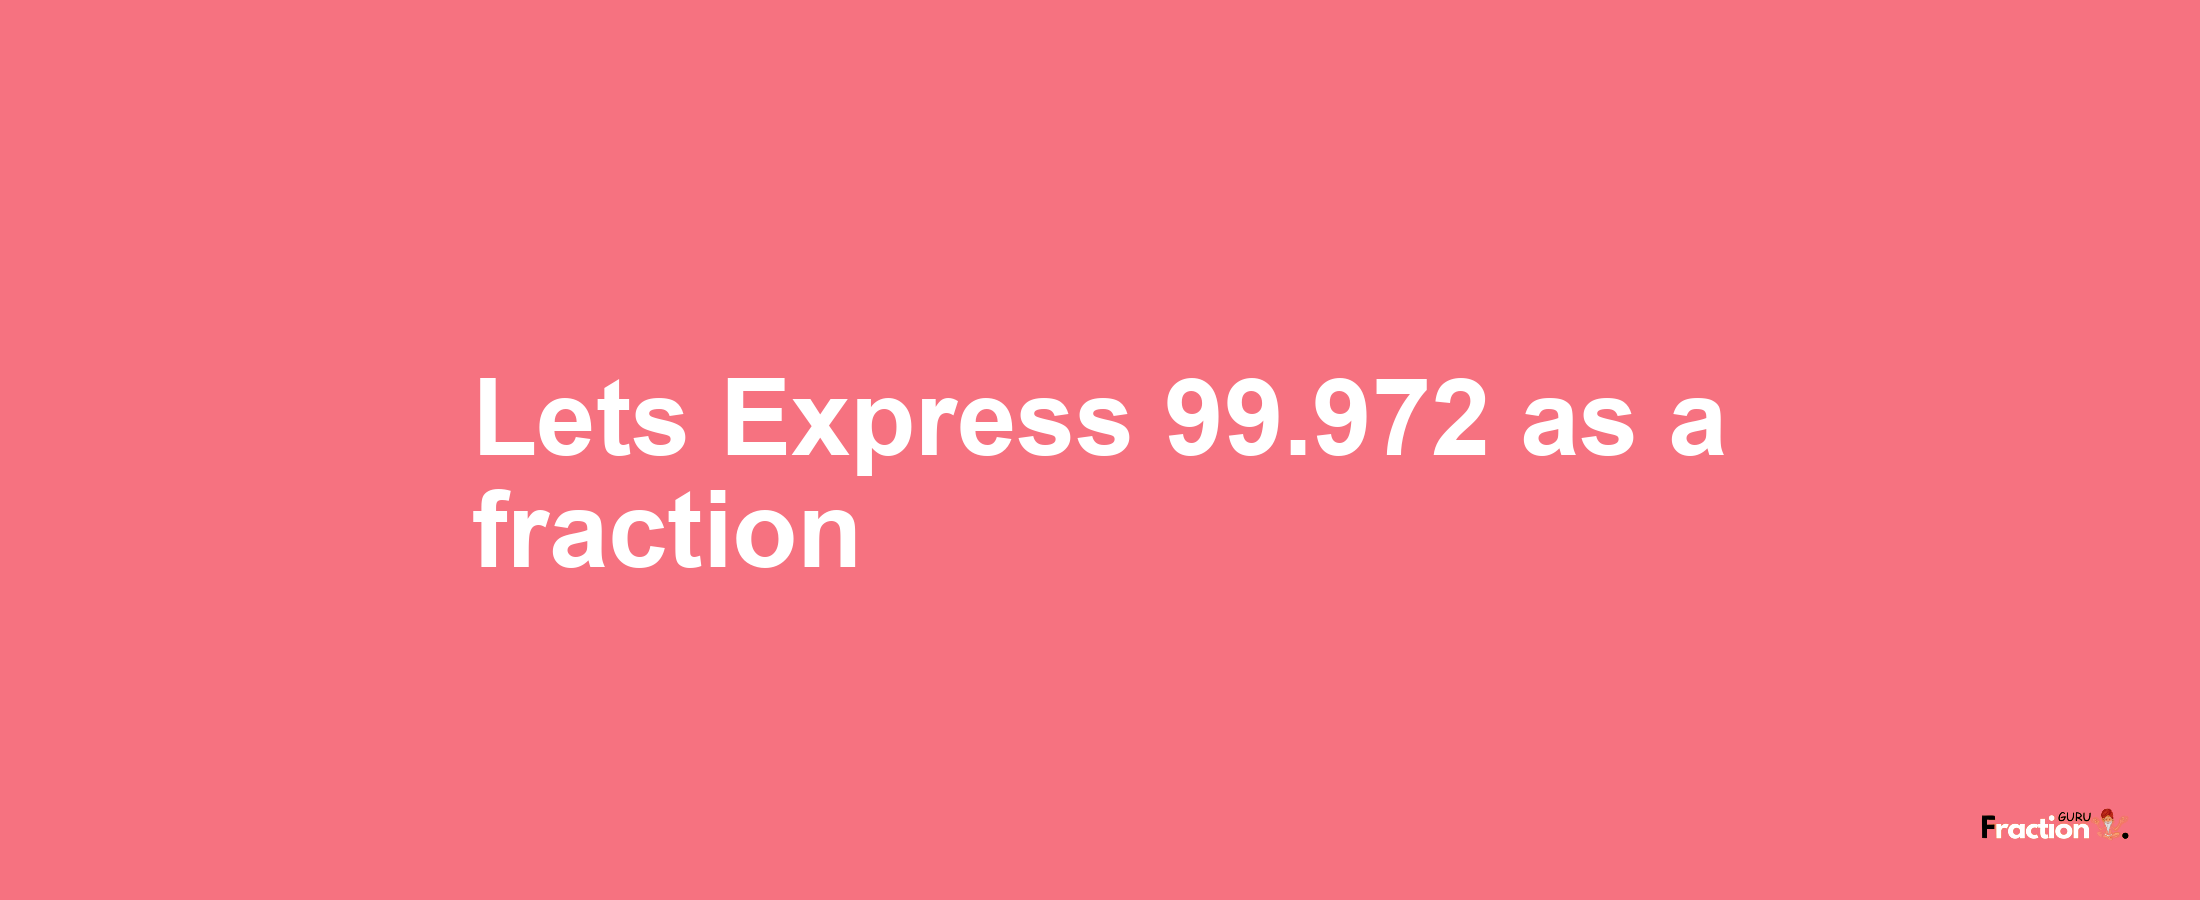 Lets Express 99.972 as afraction